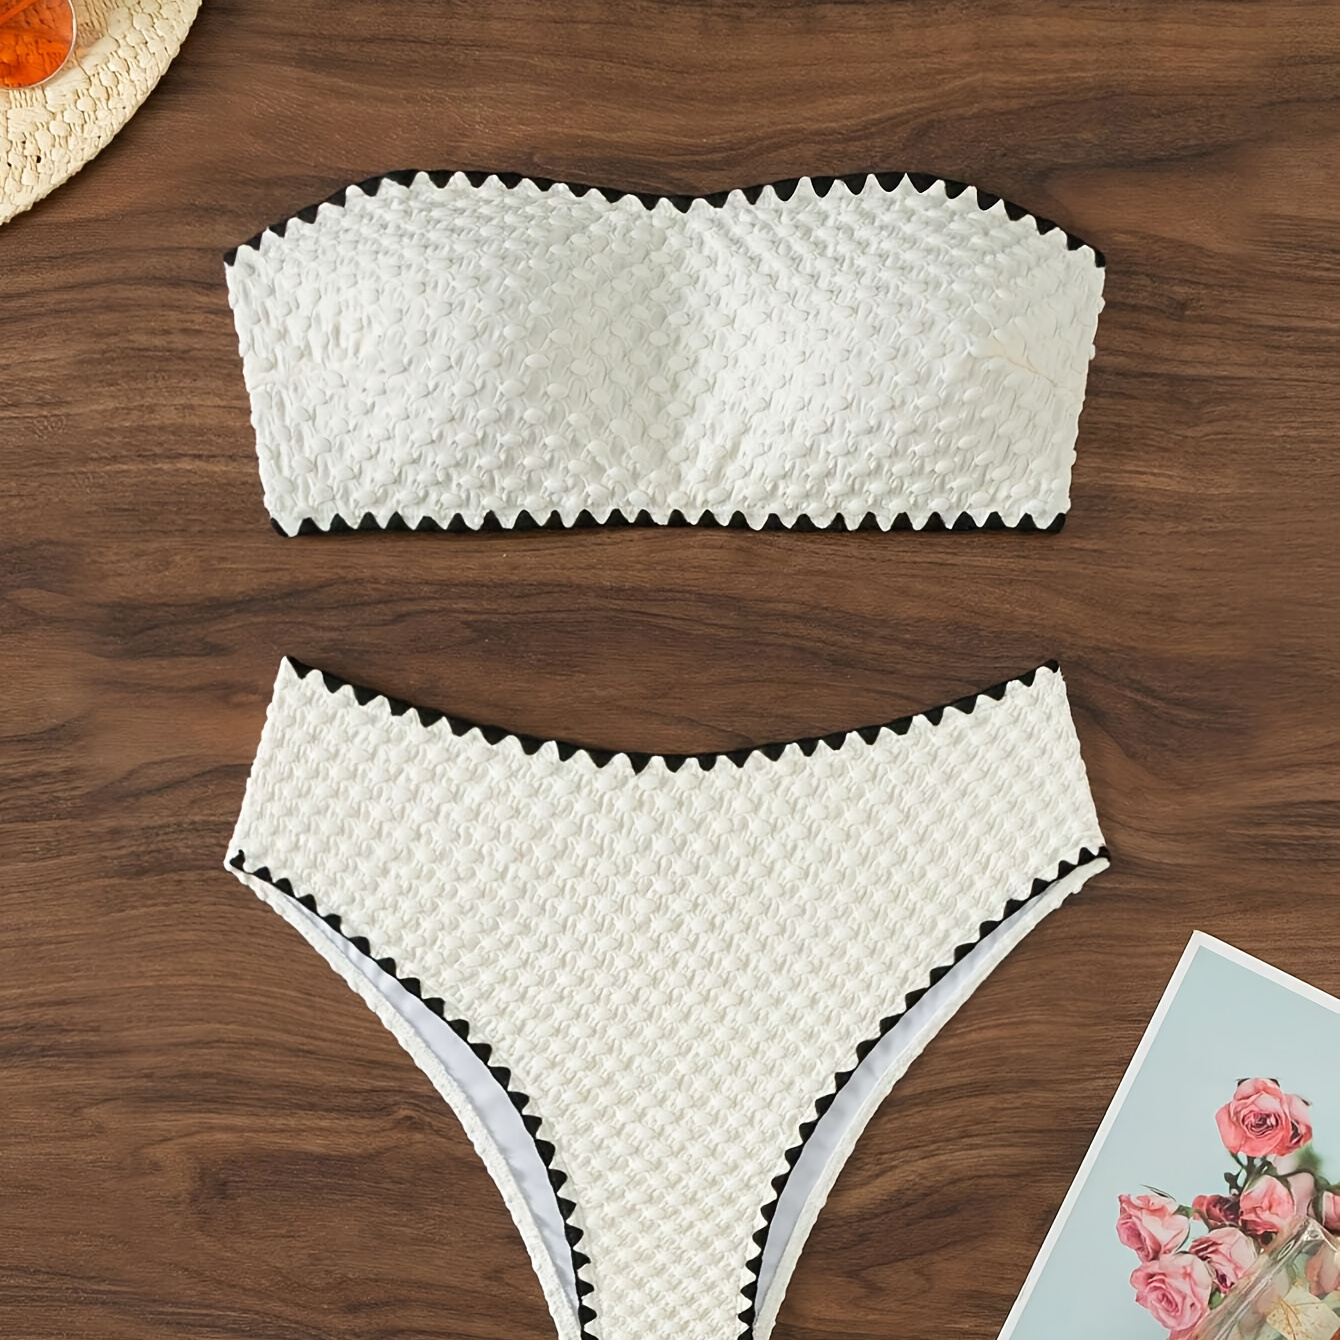 

Women's Two-piece Bikini Set, Sexy Solid Color, High-waisted With Frill Trim And Bud Flower Design Swimwear